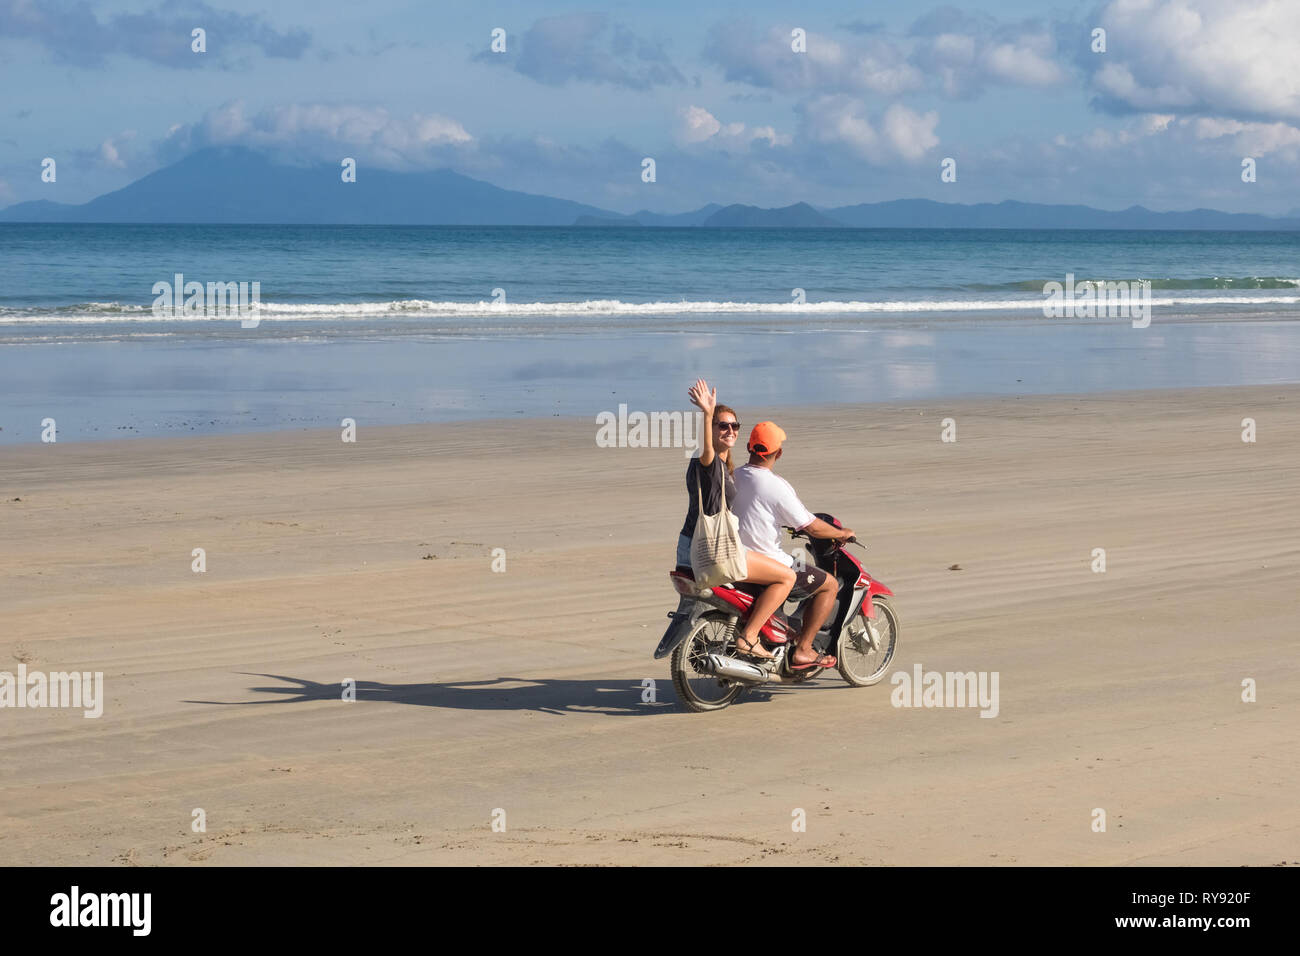 British tourist waving from back of taxi motorbike - San Vicente Long Beach, Palawan - Philippines Stock Photo